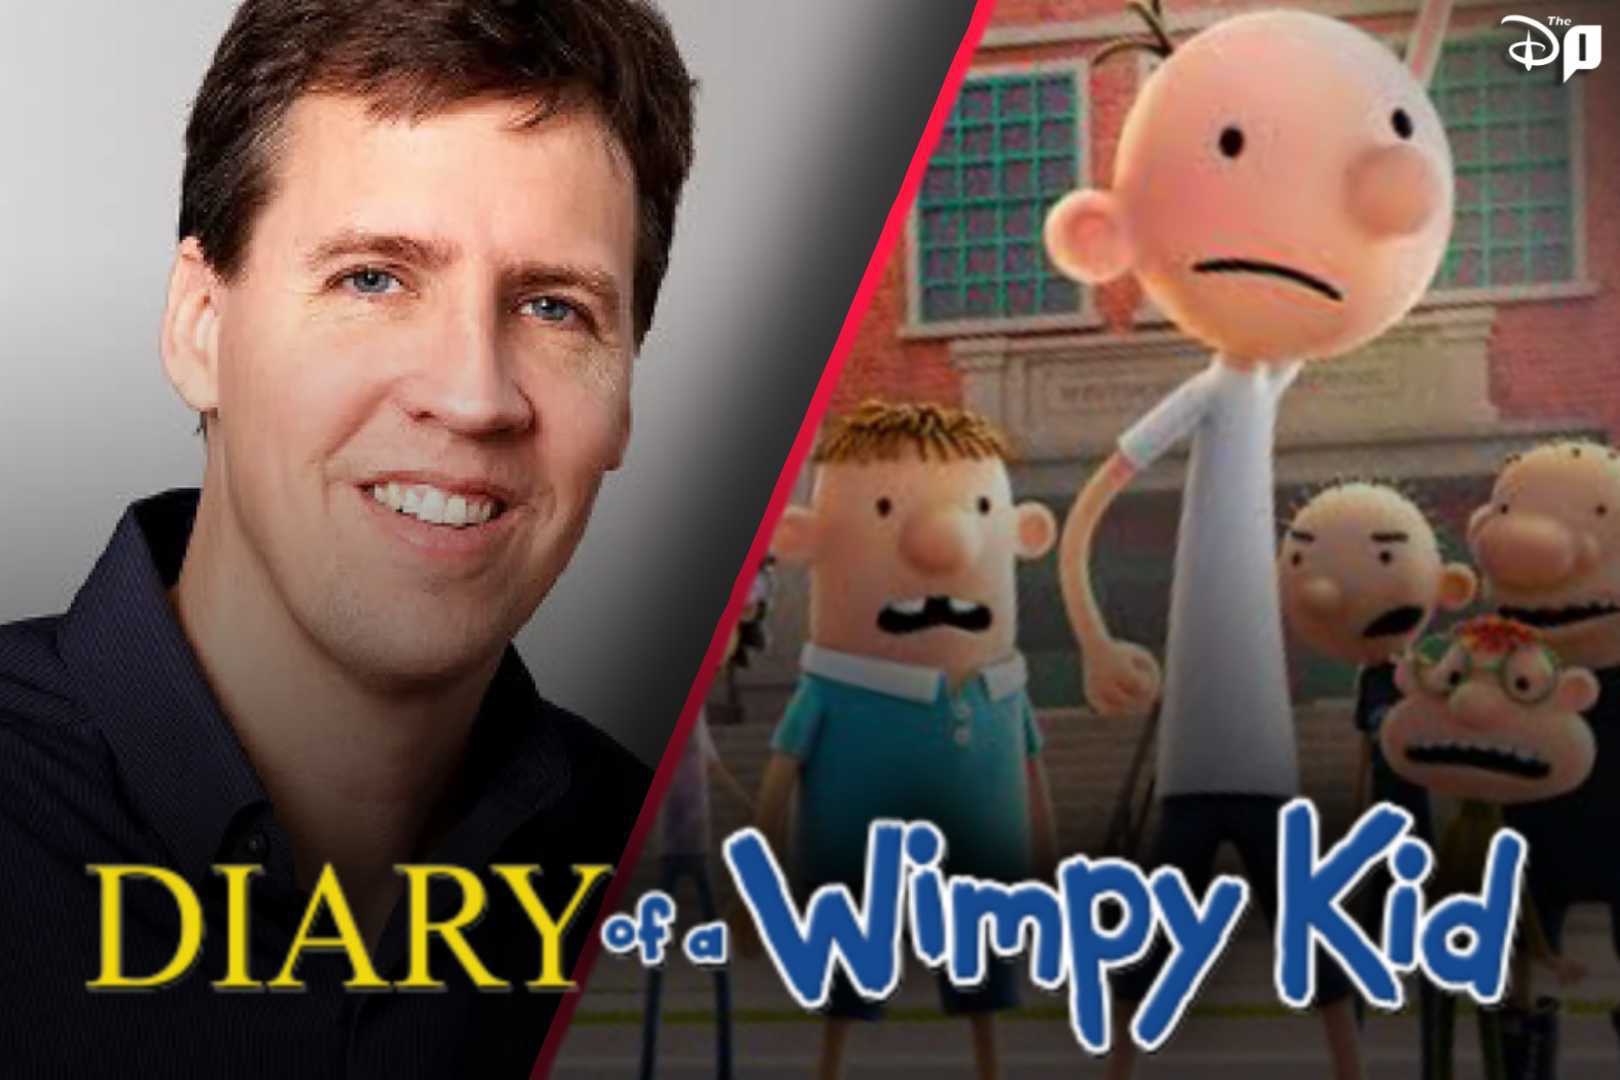 EXCLUSIVE: ‘Diary of a Wimpy Kid’ Films To Be Produced Out Of Order (Jeff Kinney Interview)